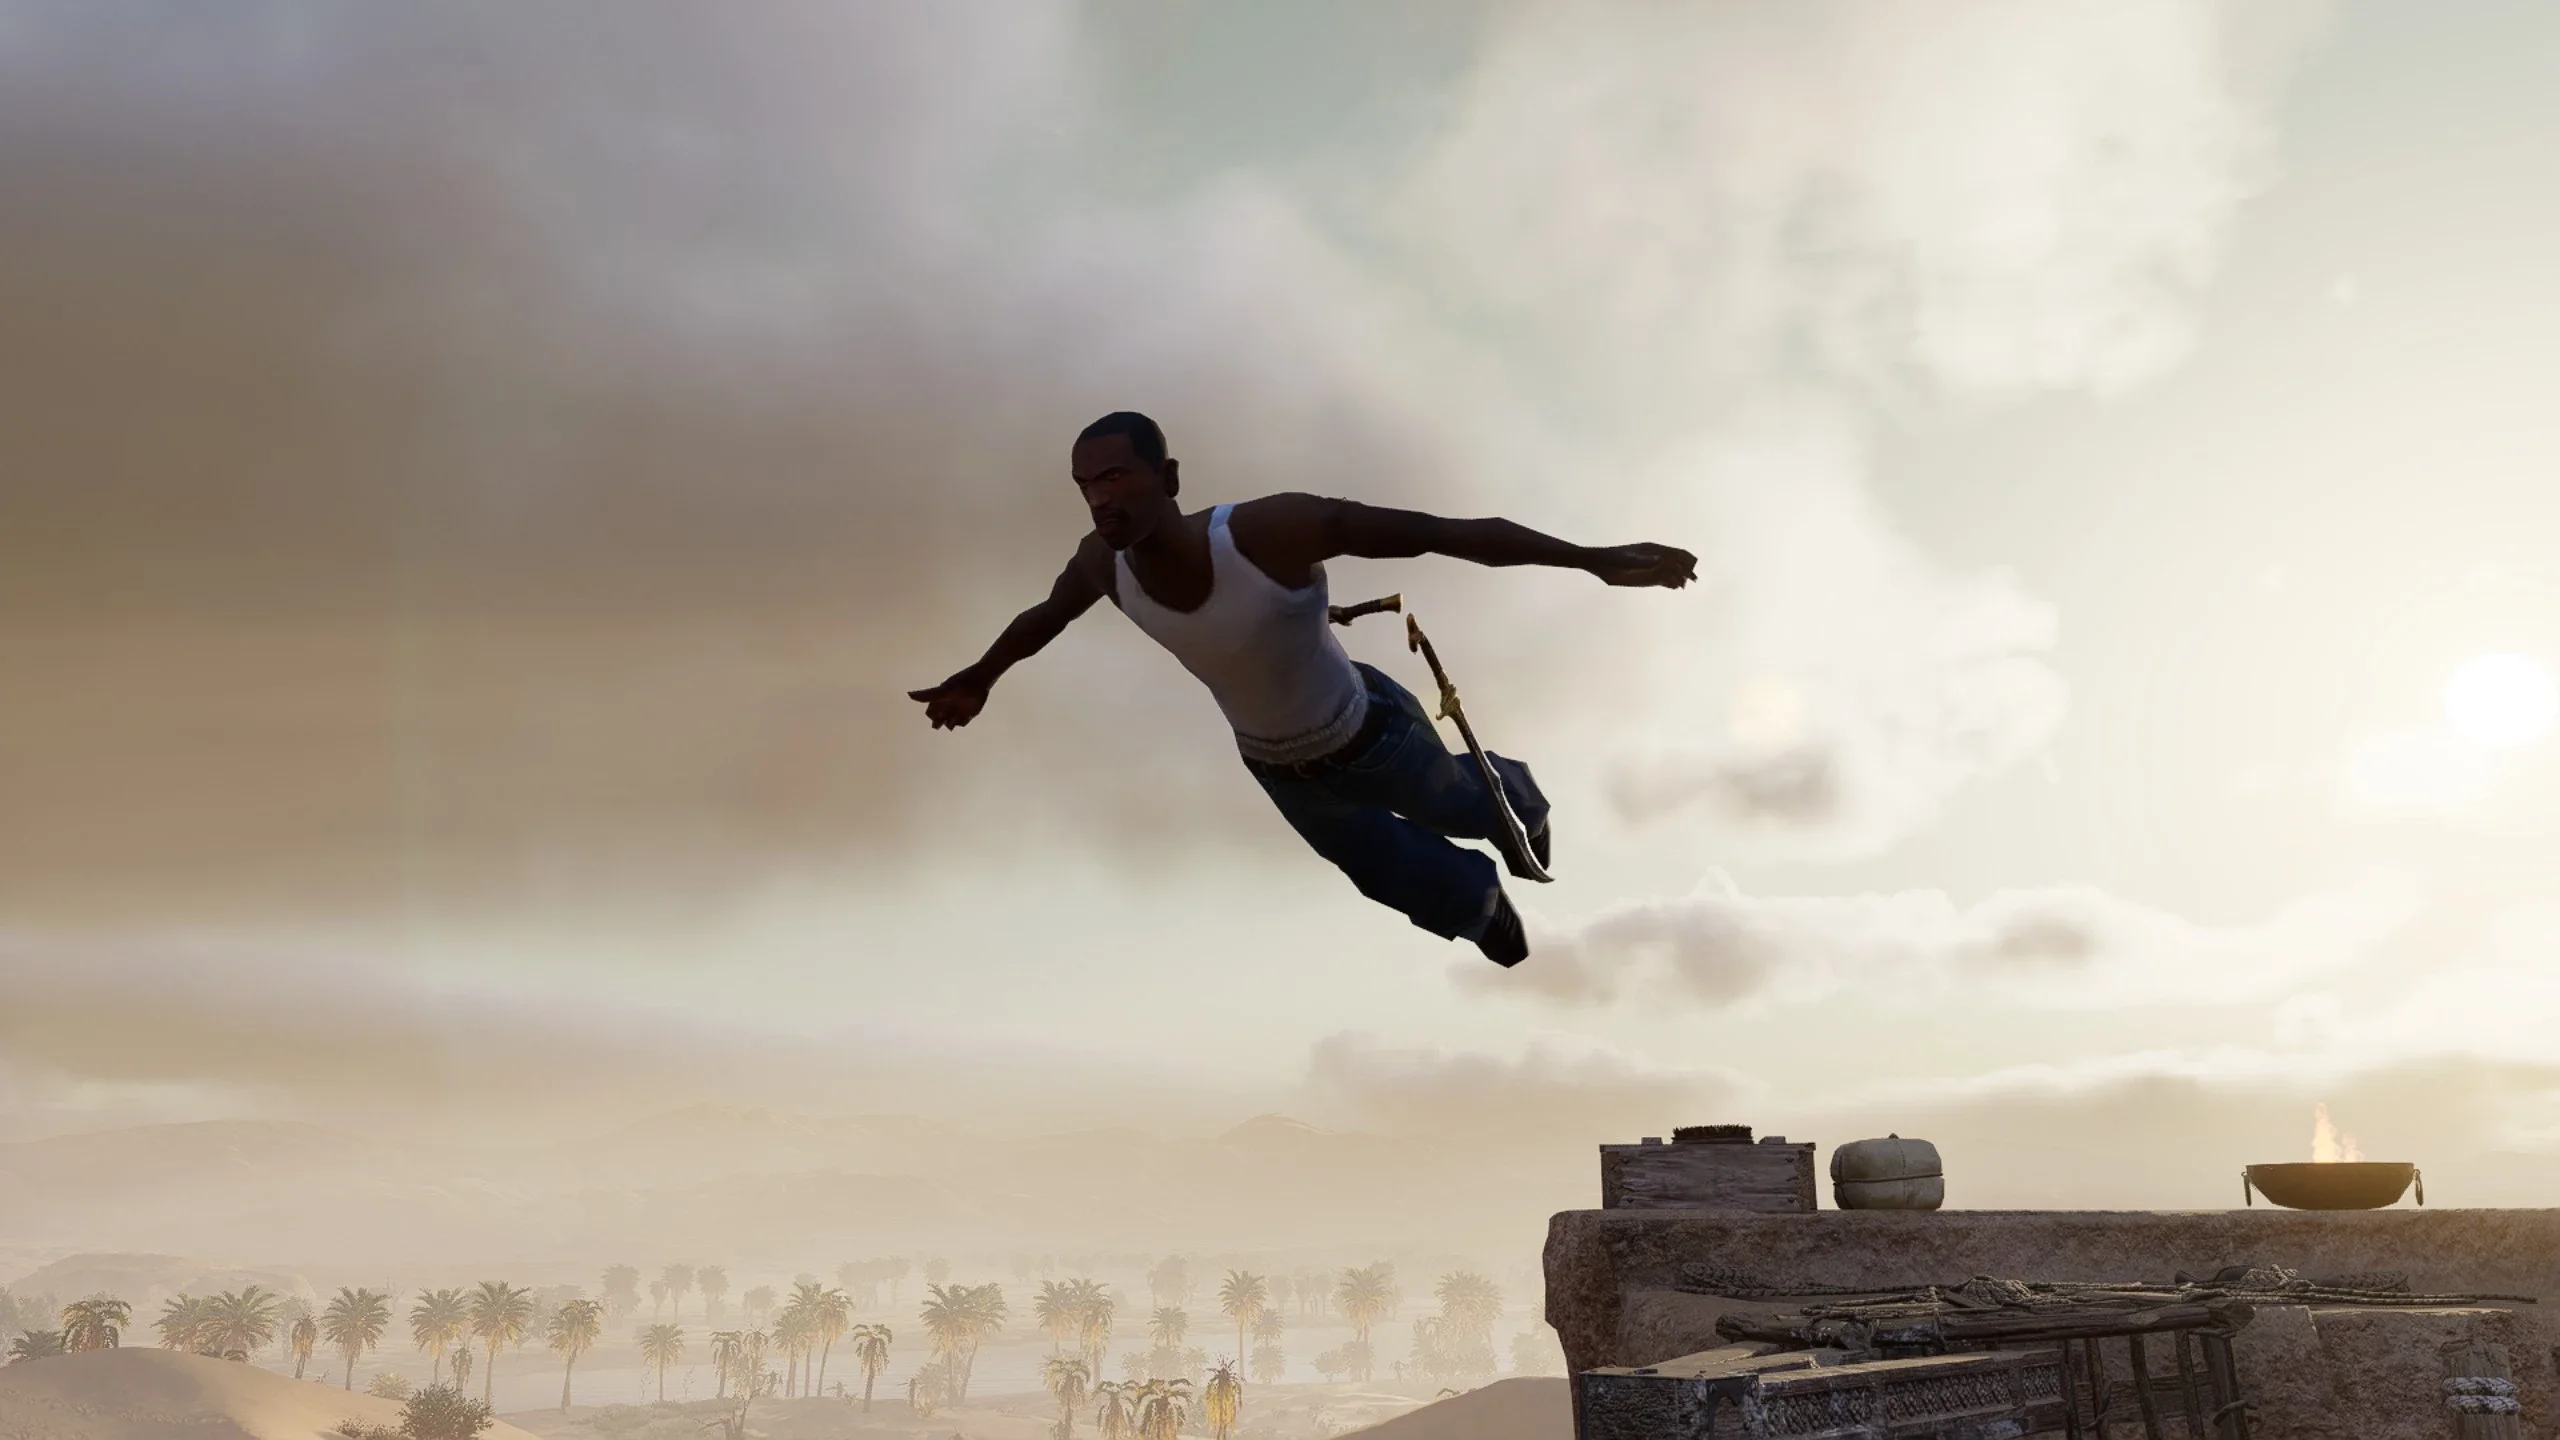 CJ from San Andreas ends up in Assassin's Creed Mirage